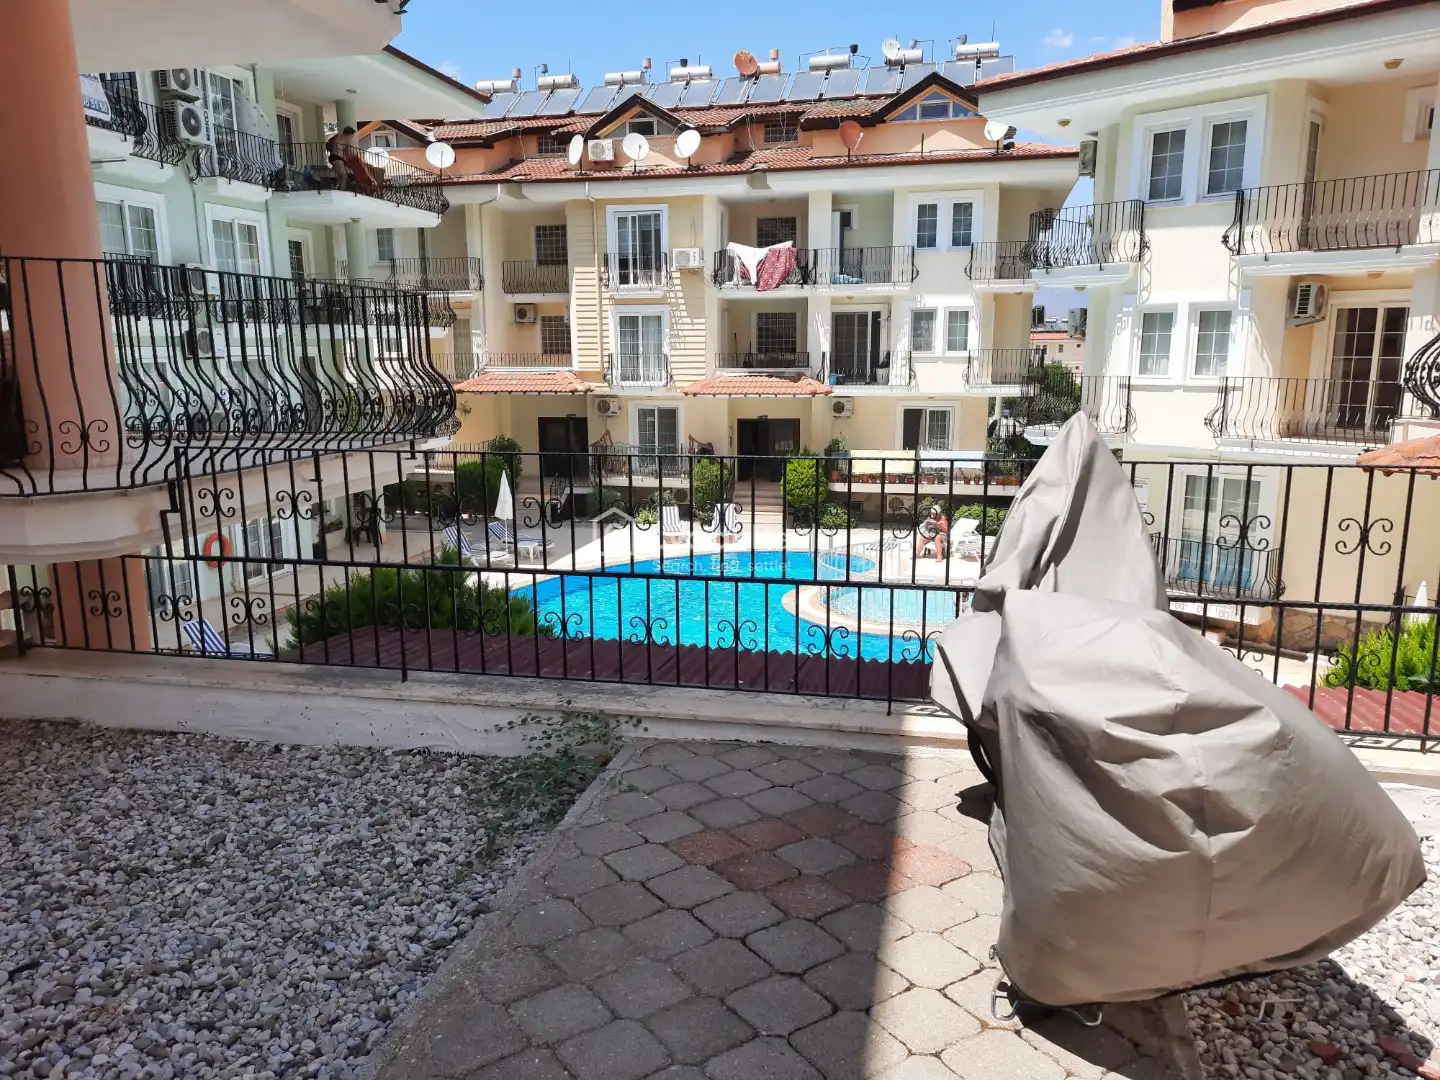 FLAT ARCTURUS - Apartment in Complex with Pool